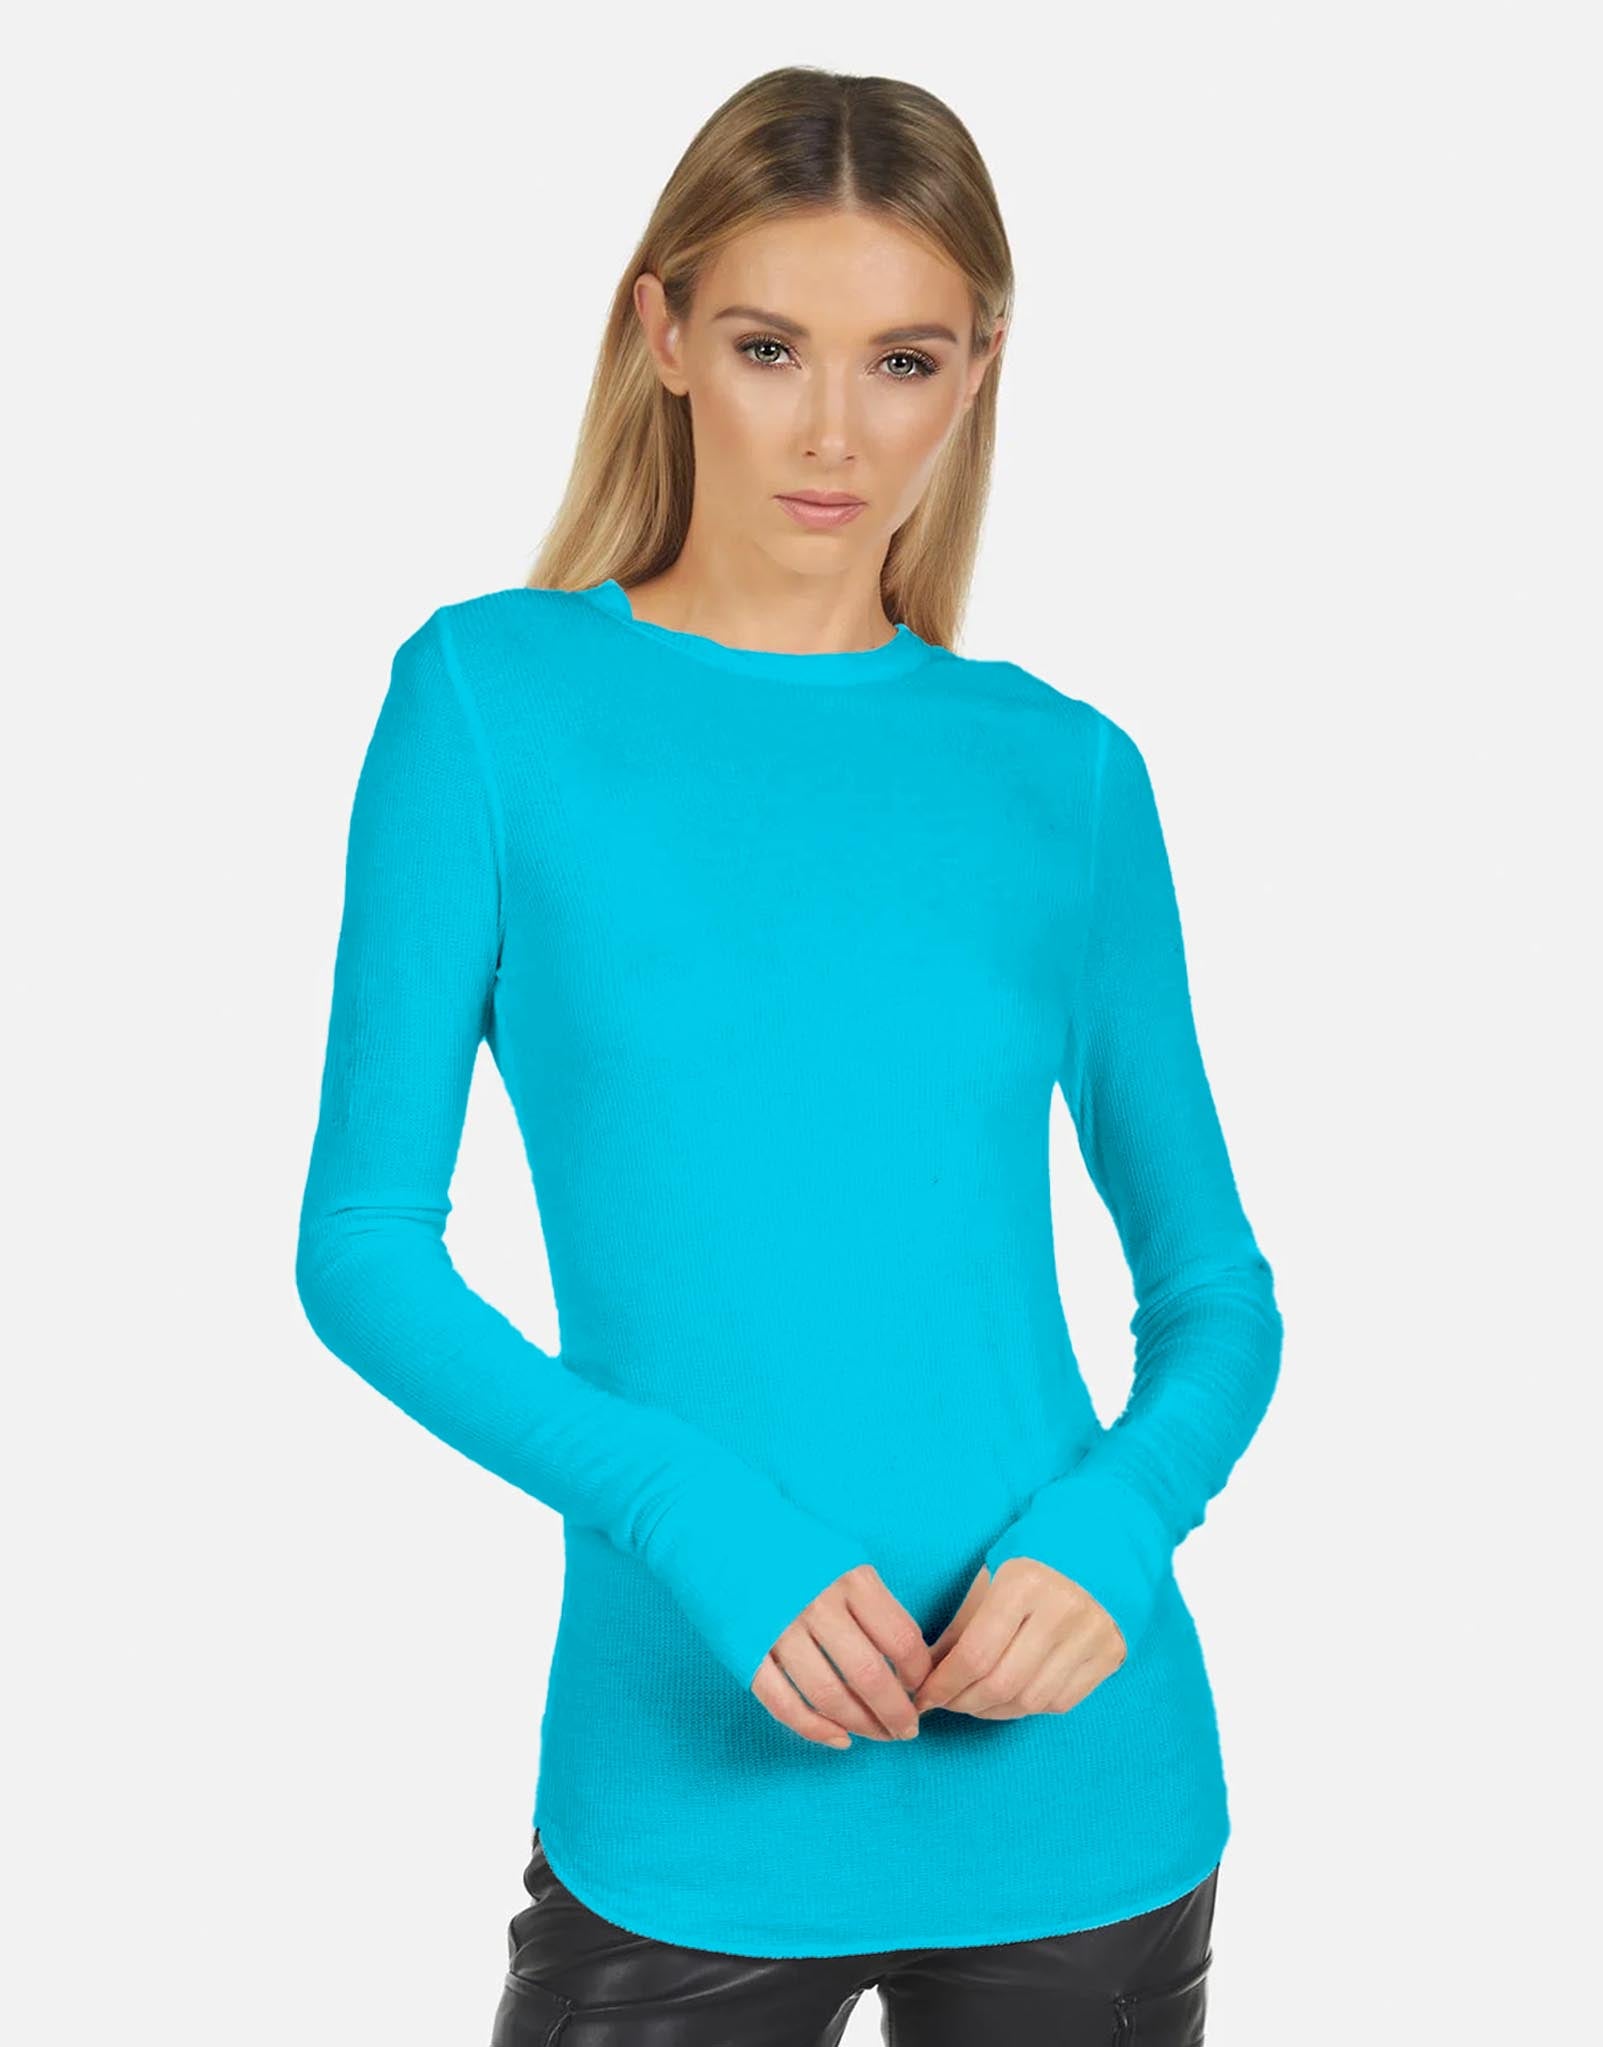 Women\'s L/S Fitted Top in Turquoise Stone | Alick by Michael Lauren